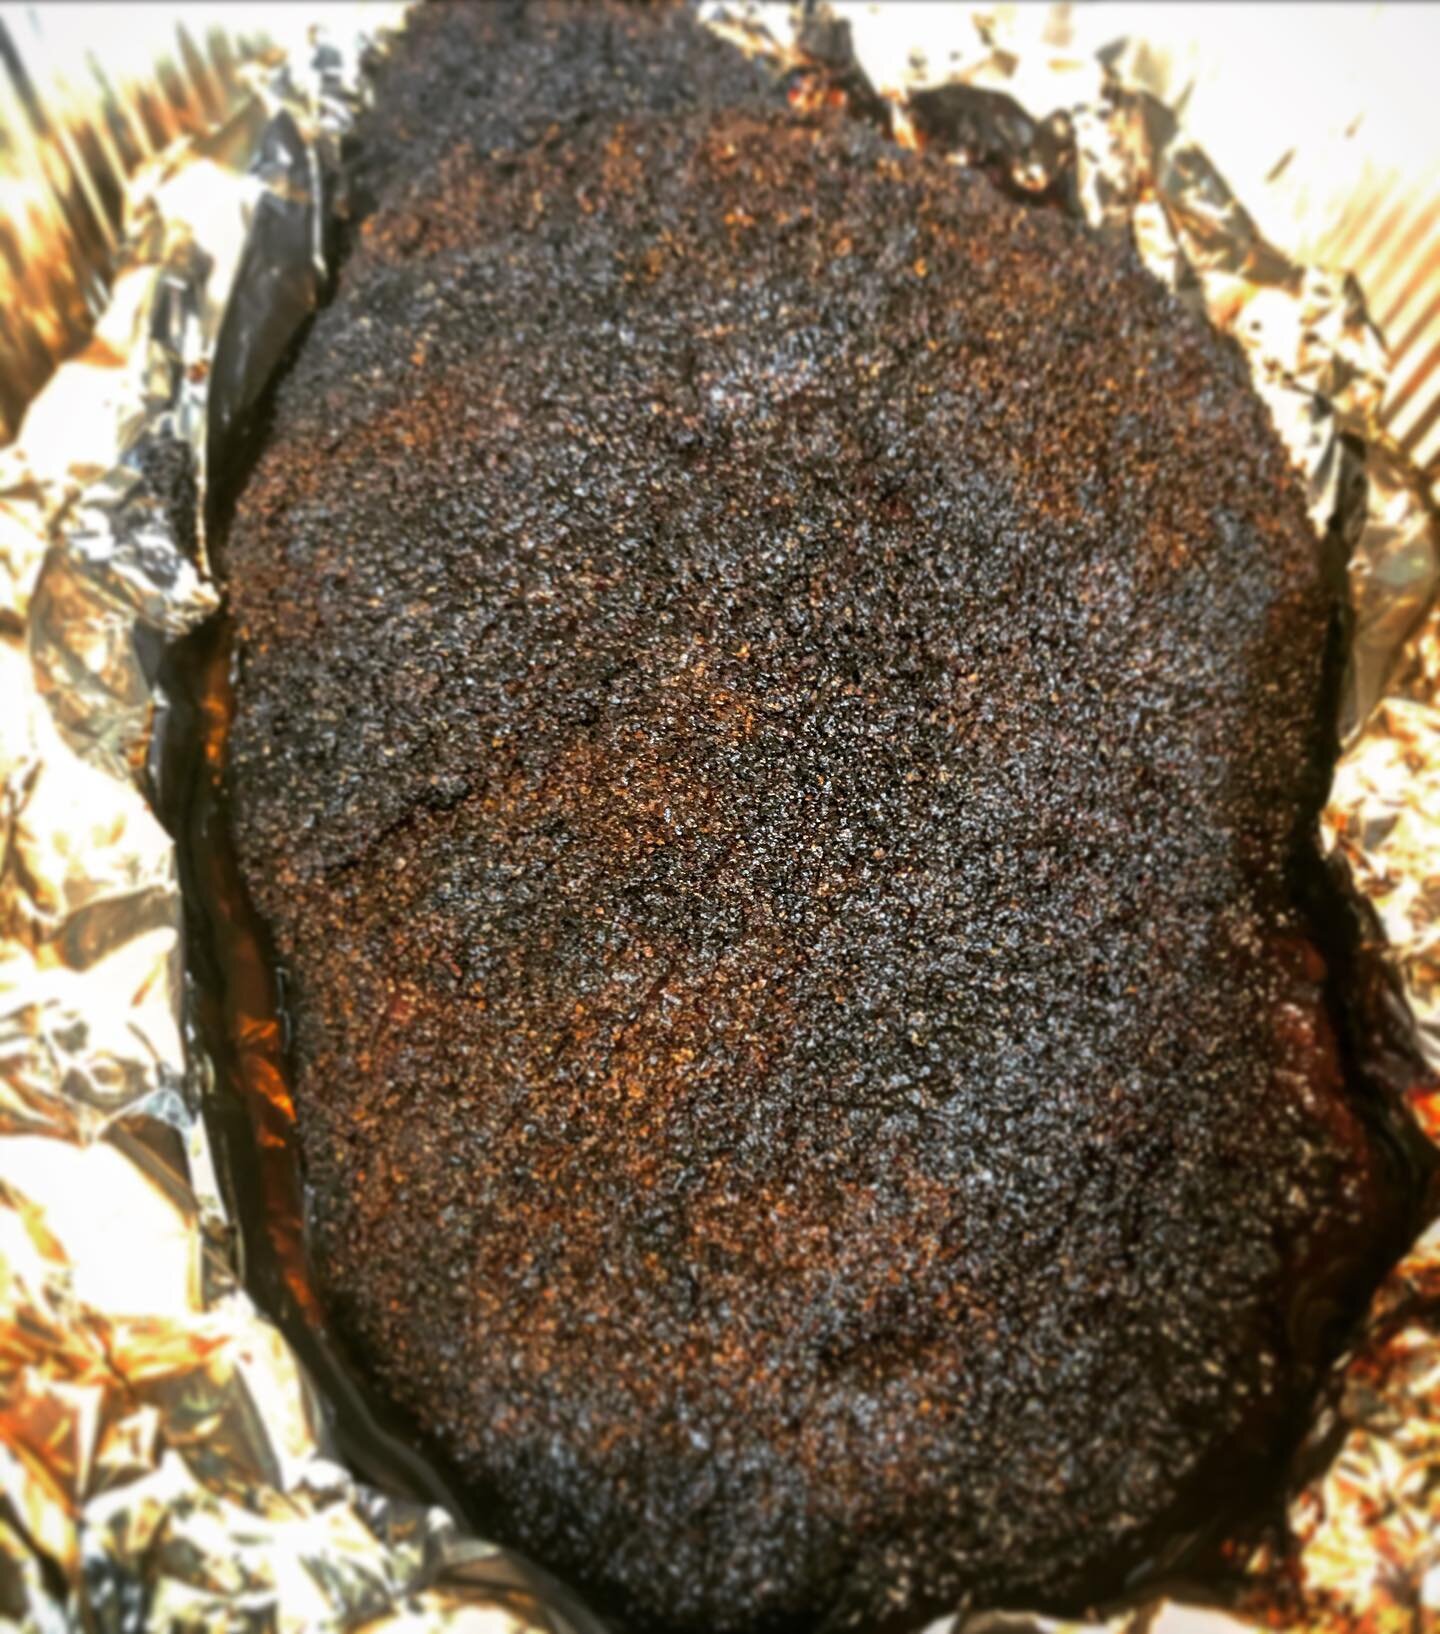 I love the simplicity of BBQ. All it takes:
- 1 Prime brisket
- 1 Part Salt
- 2 Part Pepper
- Firewood
.
Checkout the backyard recipes link in my profile to see how @chudsbbq does his simple brisket cook. 
.
#coloradobbq #bbq #brisket #mondaymotivati